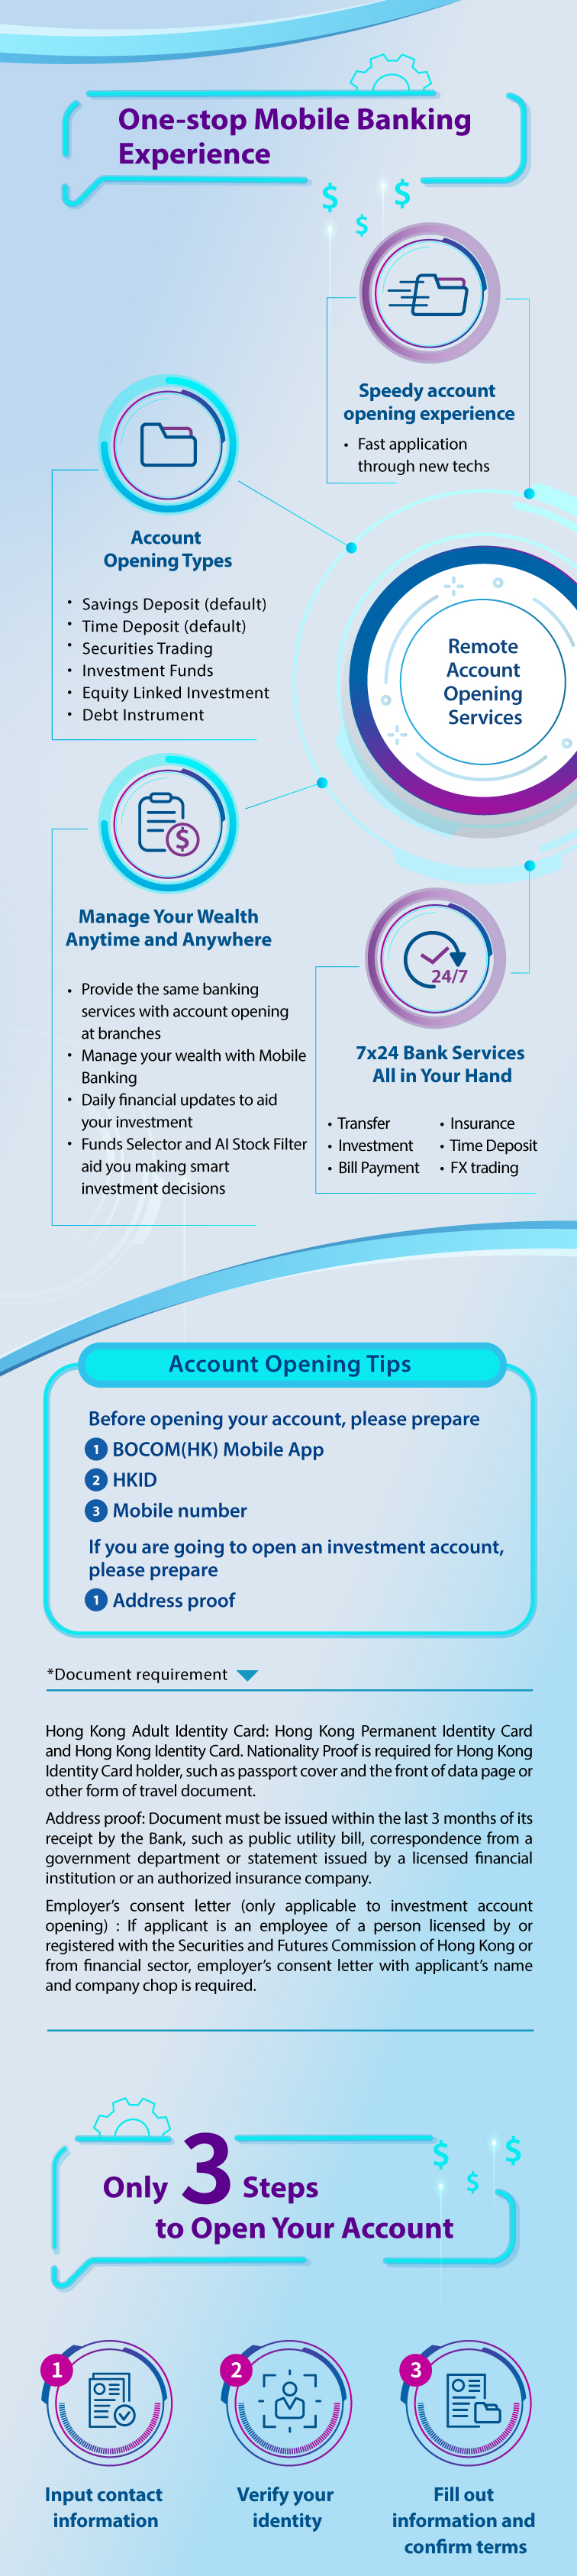 one-stop mobile banking experience remote account opening servicess  speedy account opening experience 	fast application through new techs  account opening types 	savings deposit (default) 	time deposit (default) 	securities trading 	investment funds 	equity linked investment 	debt instrument  manage your wealth anytime and anywhere 	provide the same banking services with account opening at branches 	manage your wealth with mobile banking 	daily financial updates to aid your investment 	funds selector and ai stock filter aid you making smart investment decisions  7x24 bank services all in your hand 	transfer 	investment 	bill payment 	insurance 	time deposit 	fx trading  account opening tips before opening your account, please prepare 1. bocom(hk) mobile app 2. hkid 3. mobile number if you are going to open an investment account, please prepare  1.	address proof  *document requirement hong kong adult identity card: hong kong permanent identity card and hong kong identity card. nationality proof is required for hong kong identity card holder, such as passport cover and the front of data page or other form of travel document. address proof: document must be issued within the last 3 months of its receipt by the bank, such as public utility bill, correspondence from a government department or statement issued by a licensed financial institution or an authorized insurance company. employer’s consent letter (only applicable to investment account opening) : if applicant is an employee of a person licensed by or registered with the securities and futures commission of hong kong or from financial sector, employer’s consent letter with applicant’s name and company chop is required.  only 3 steps to open your account 1.	input contact information 2.	verify your identity 3.	fill out information and confirm terms